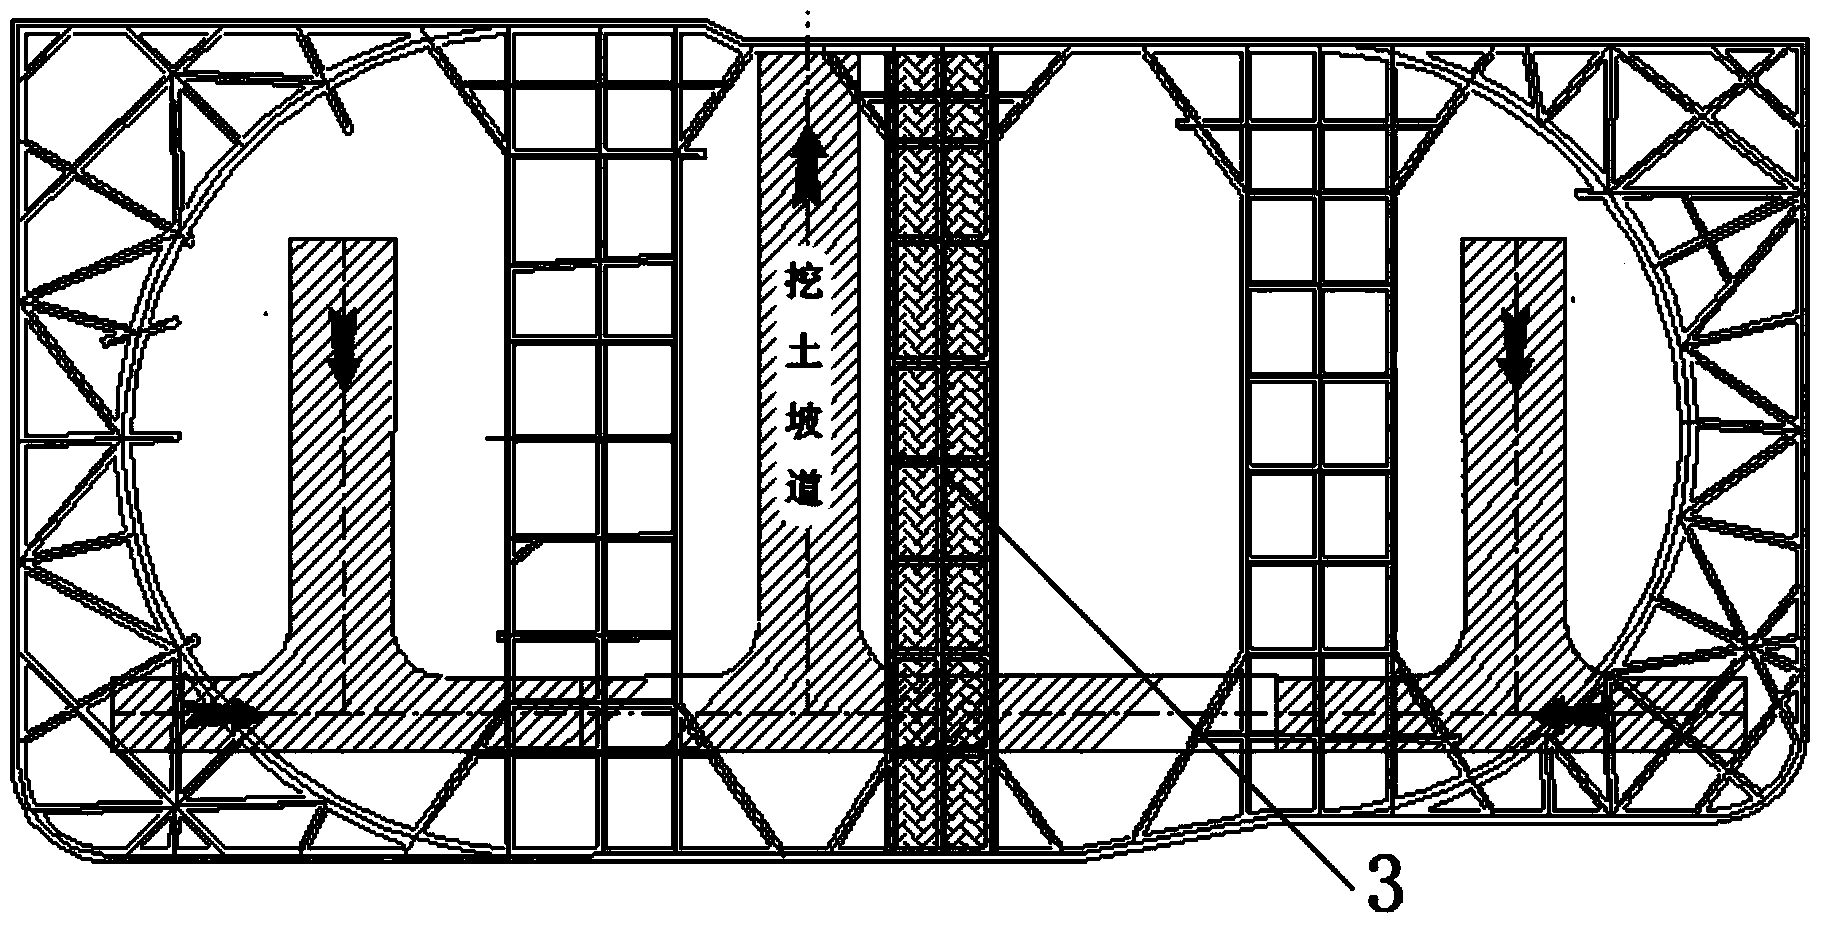 Large-scale deep foundation pit slope remaining soil digging and pit-in-pit concrete post casting construction method